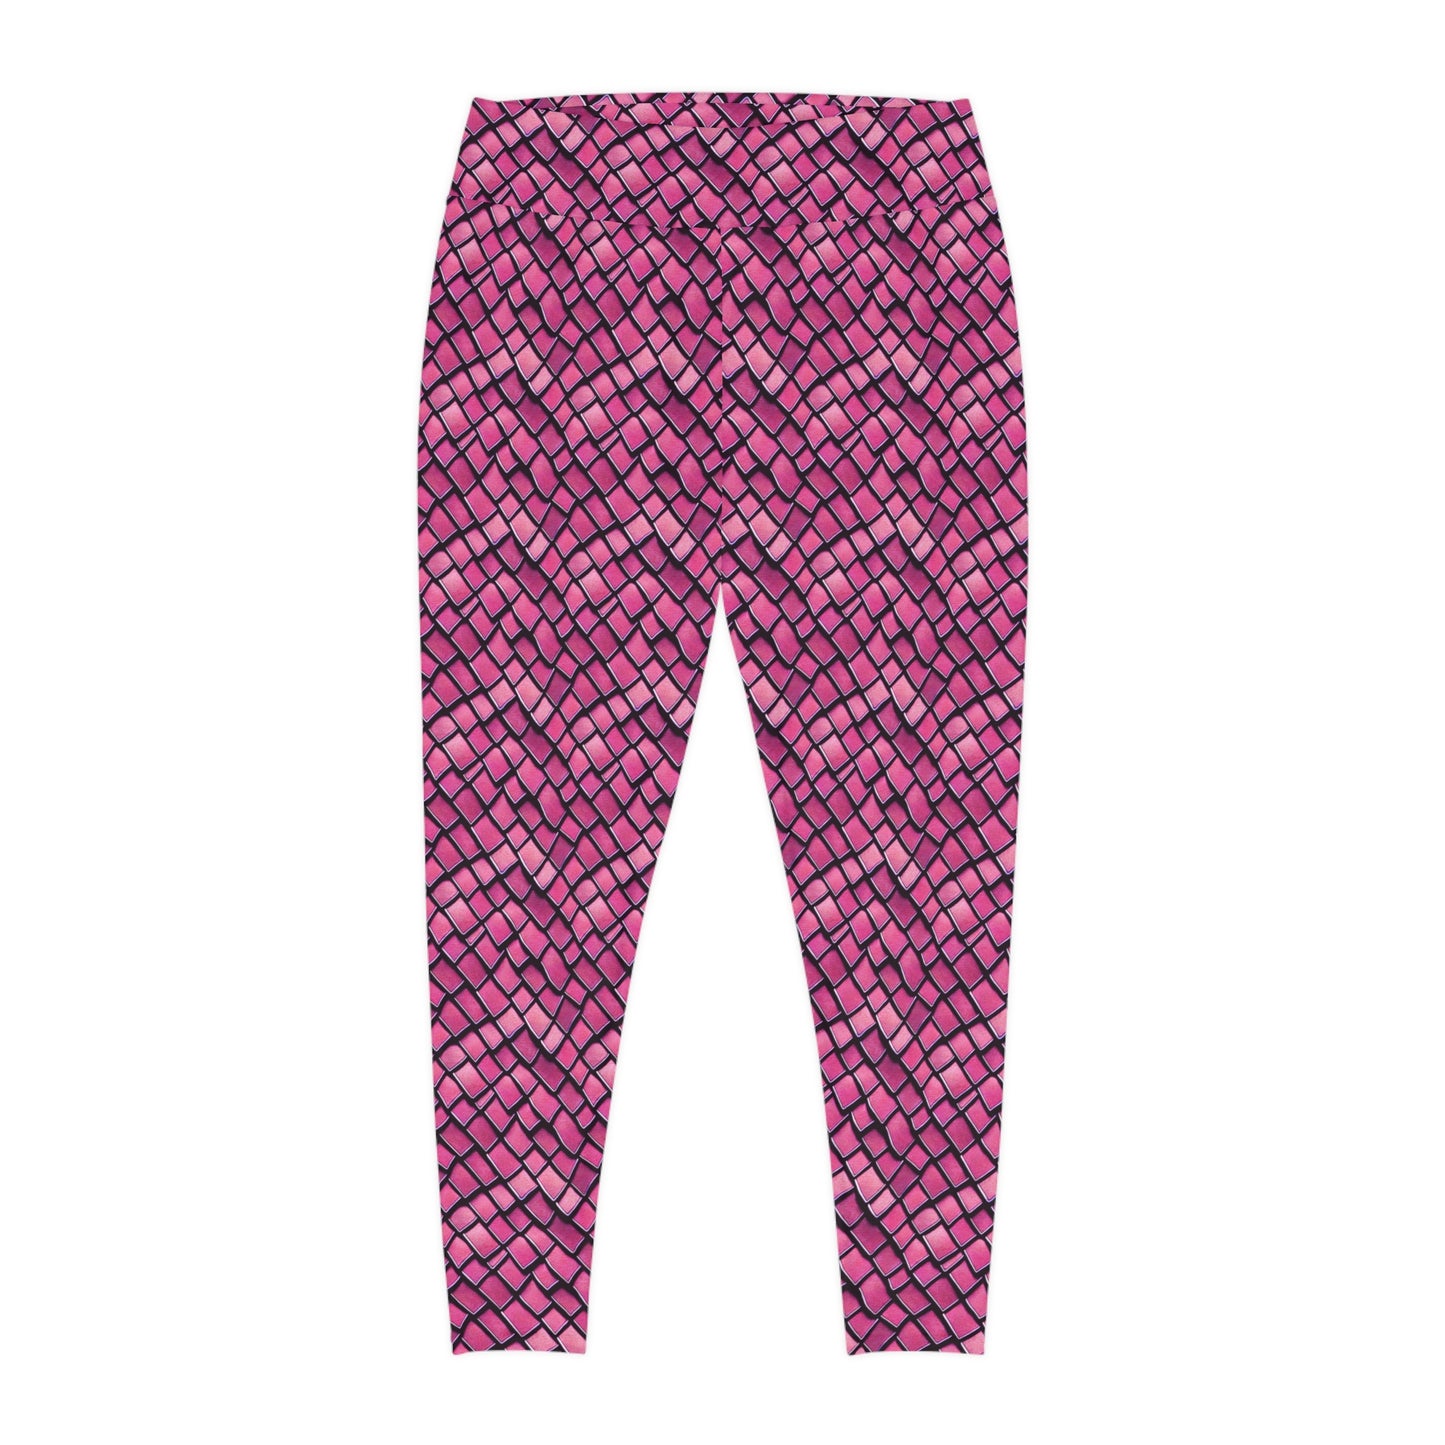 Plus Size Leggings Pink Dragon Scales Mermaid Ocean Inspired Design 4-Way Stretch, High-Rise Waistband, UPF 50+, Beach, Pool, Workout, Gym